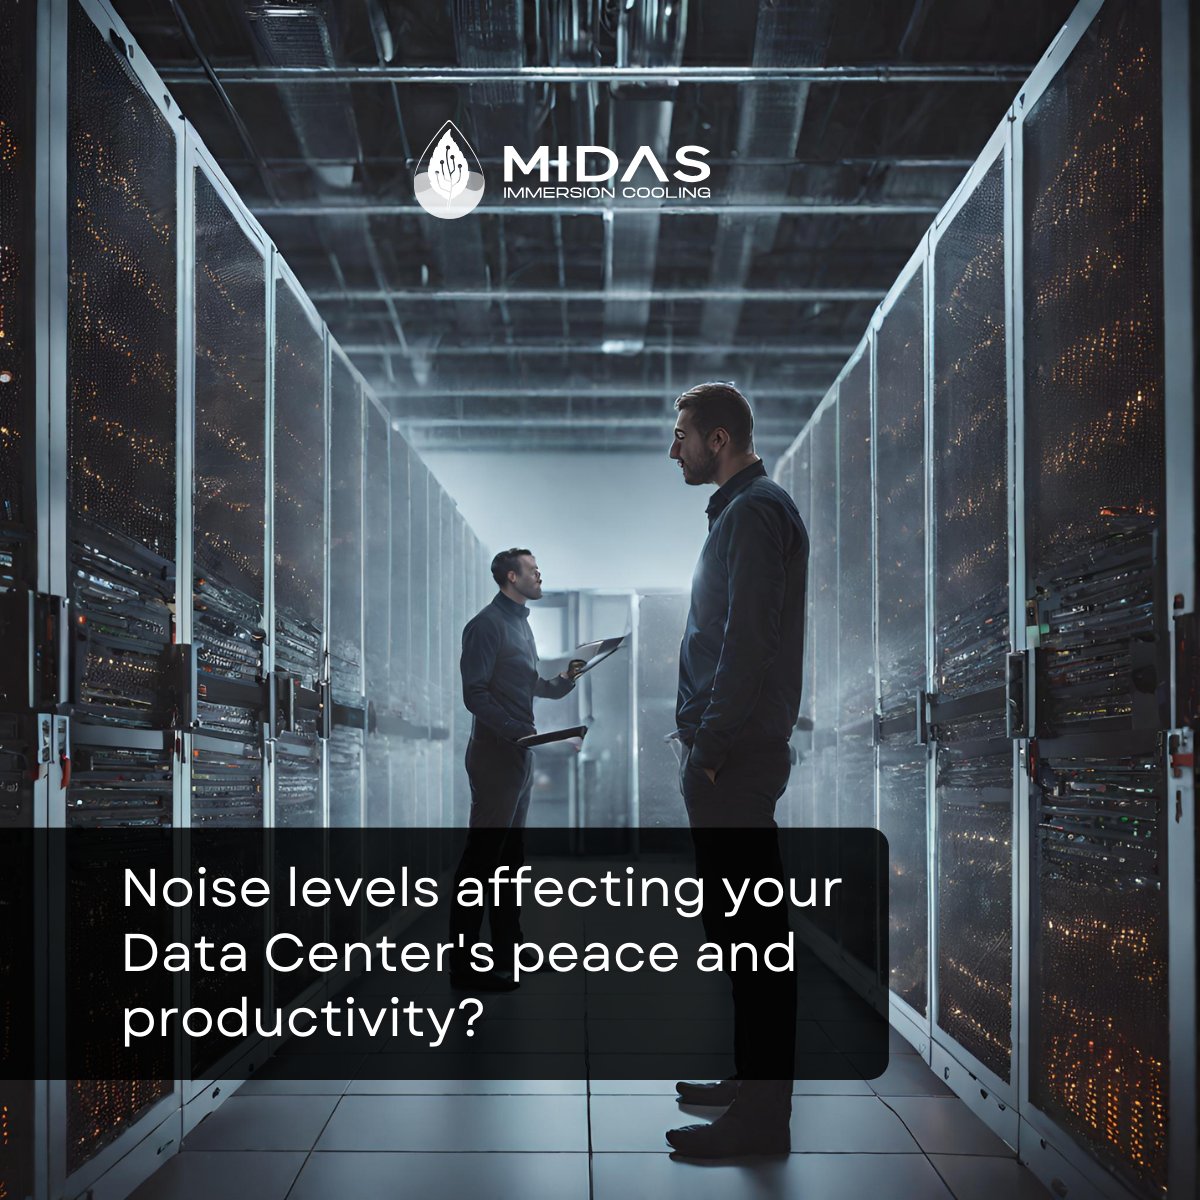 Midas Immersion Cooling operates quietly, creating a calm and focused environment. Learn more at: bit.ly/3tf1zkV 
#centrodedatos #datacenter #datacenters #datacentre #tecnologia #tech #greentech #immersioncooling #datacentercooling #TechInnovation